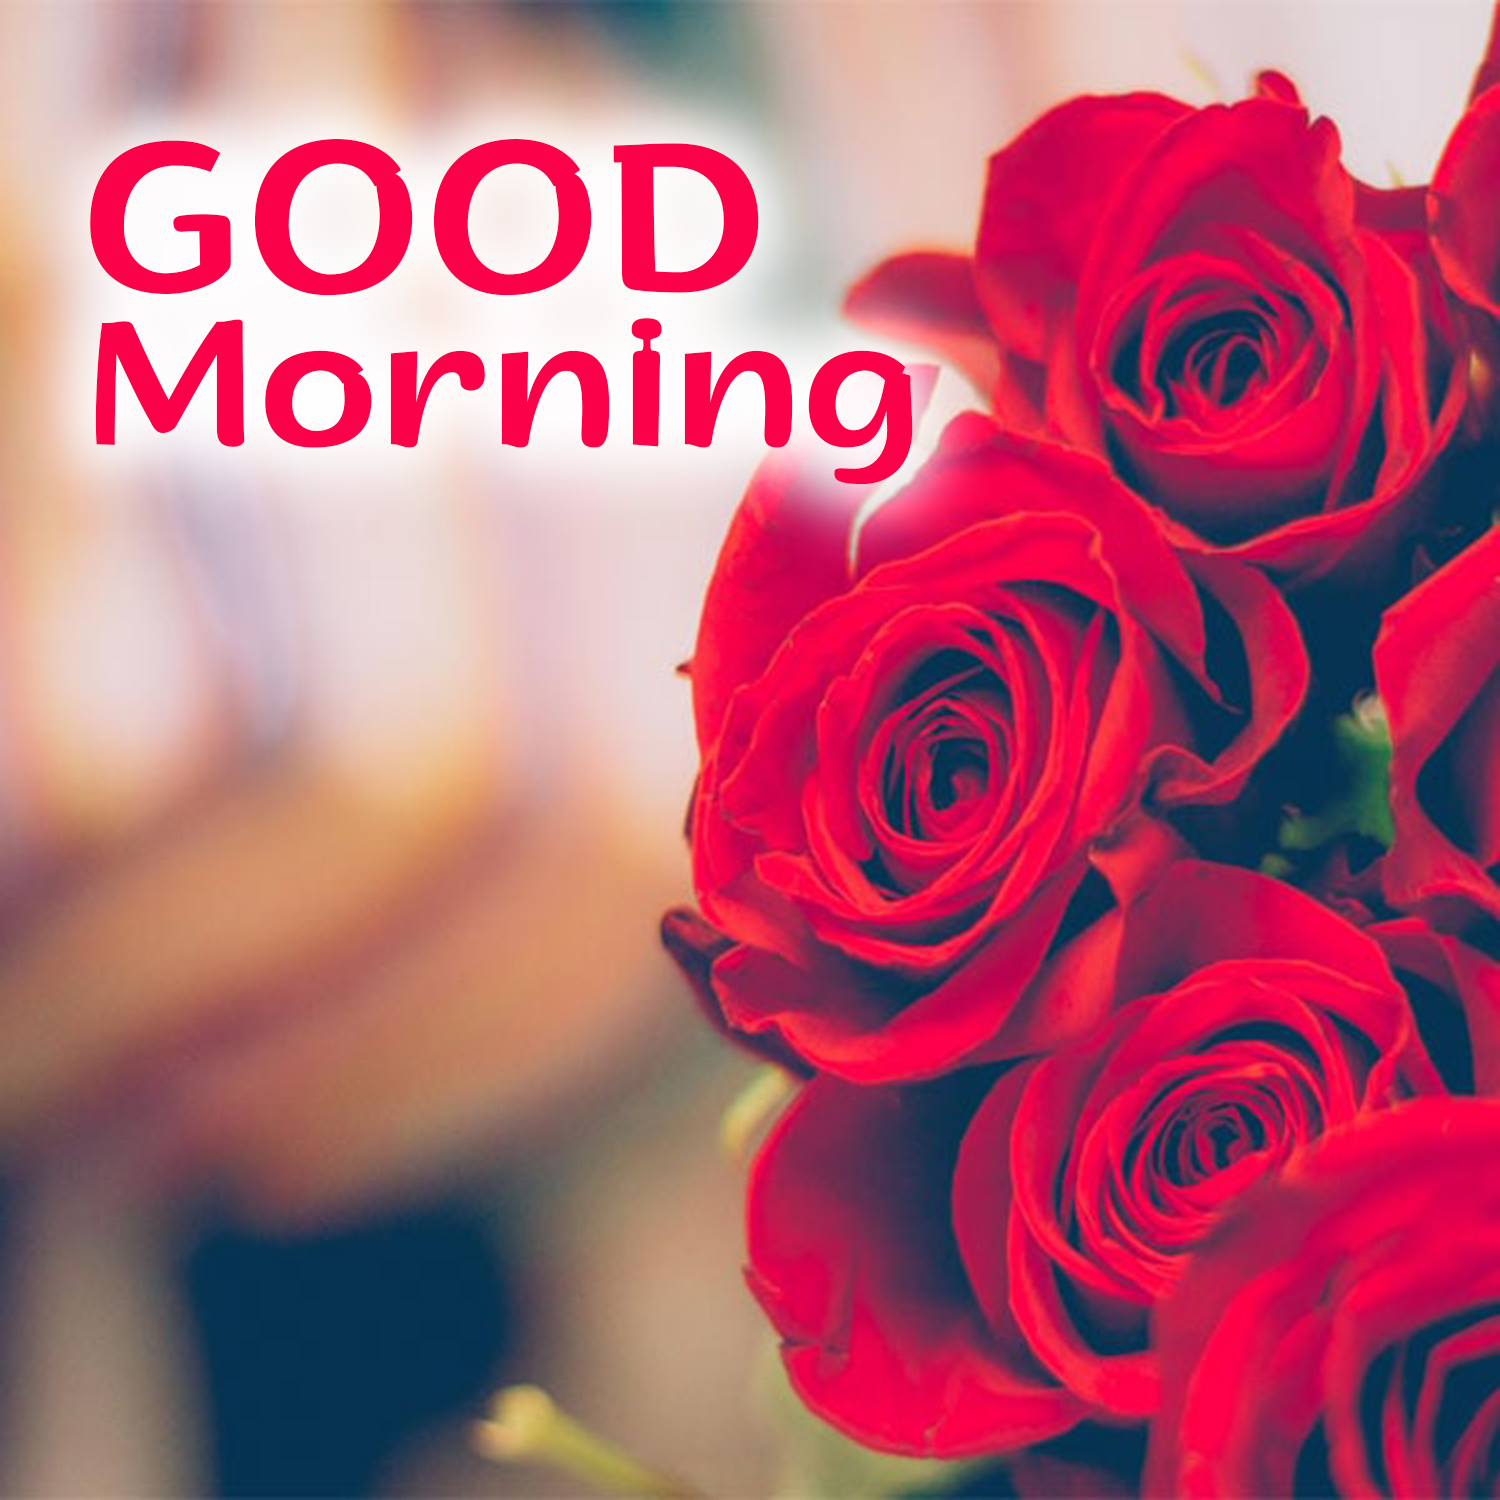 Best Good Morning flowers Image for IOS and Android Morning Image, Quotes, Wishes, Messages, greetings & eCards